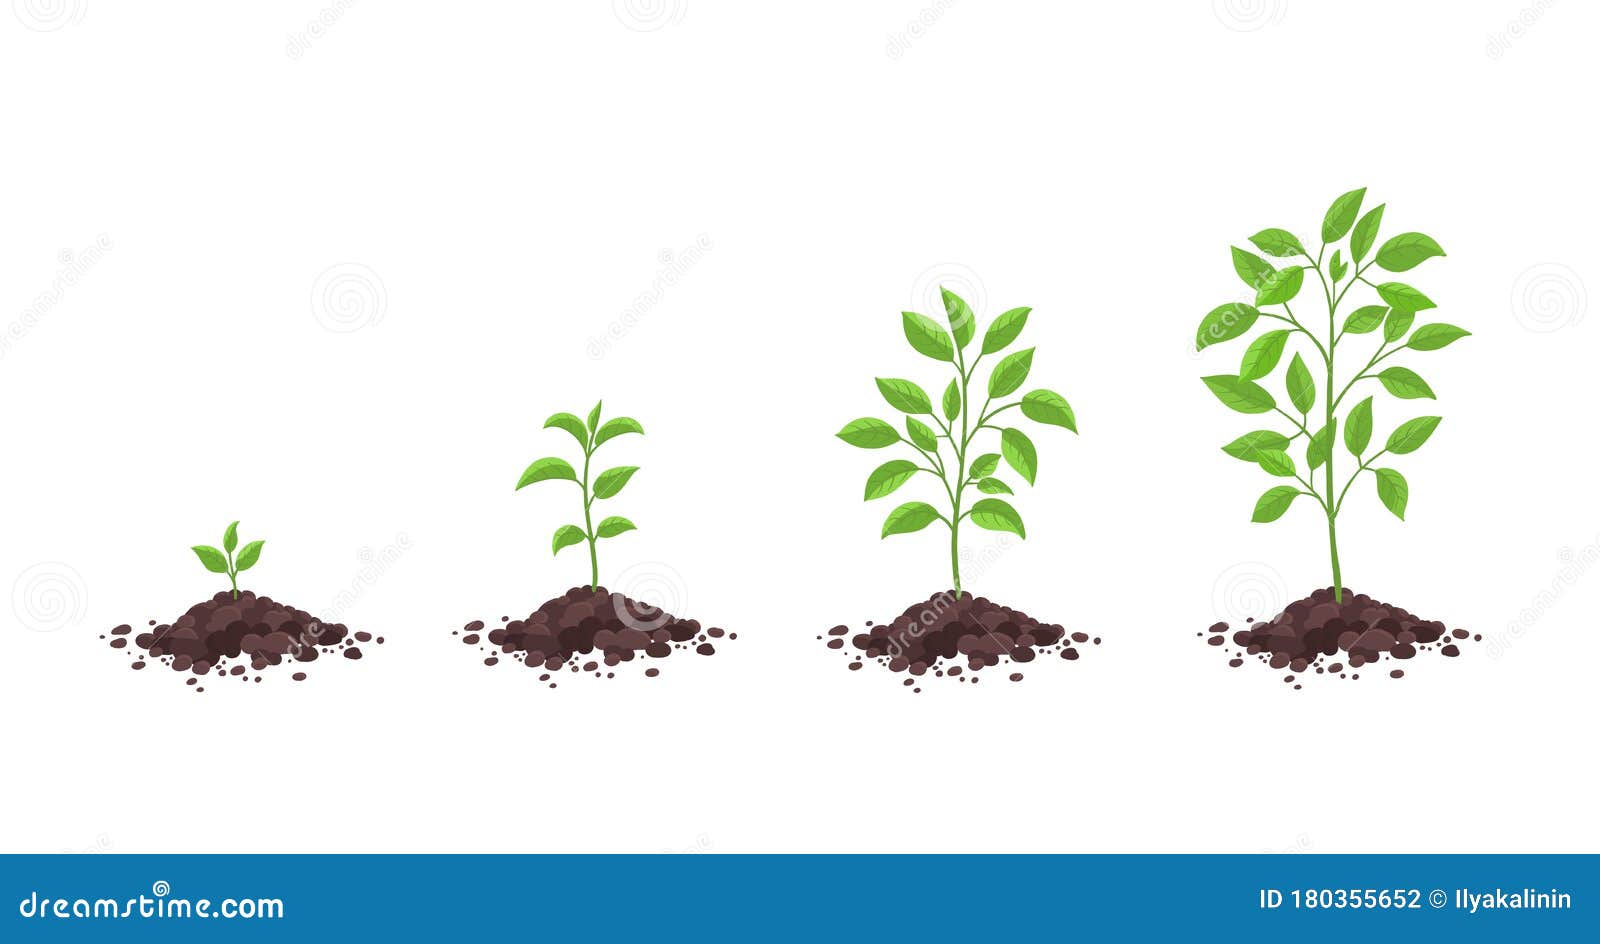 Growth Stages Diagram. Sprout Seedling Shoot Germination in the Pile ...